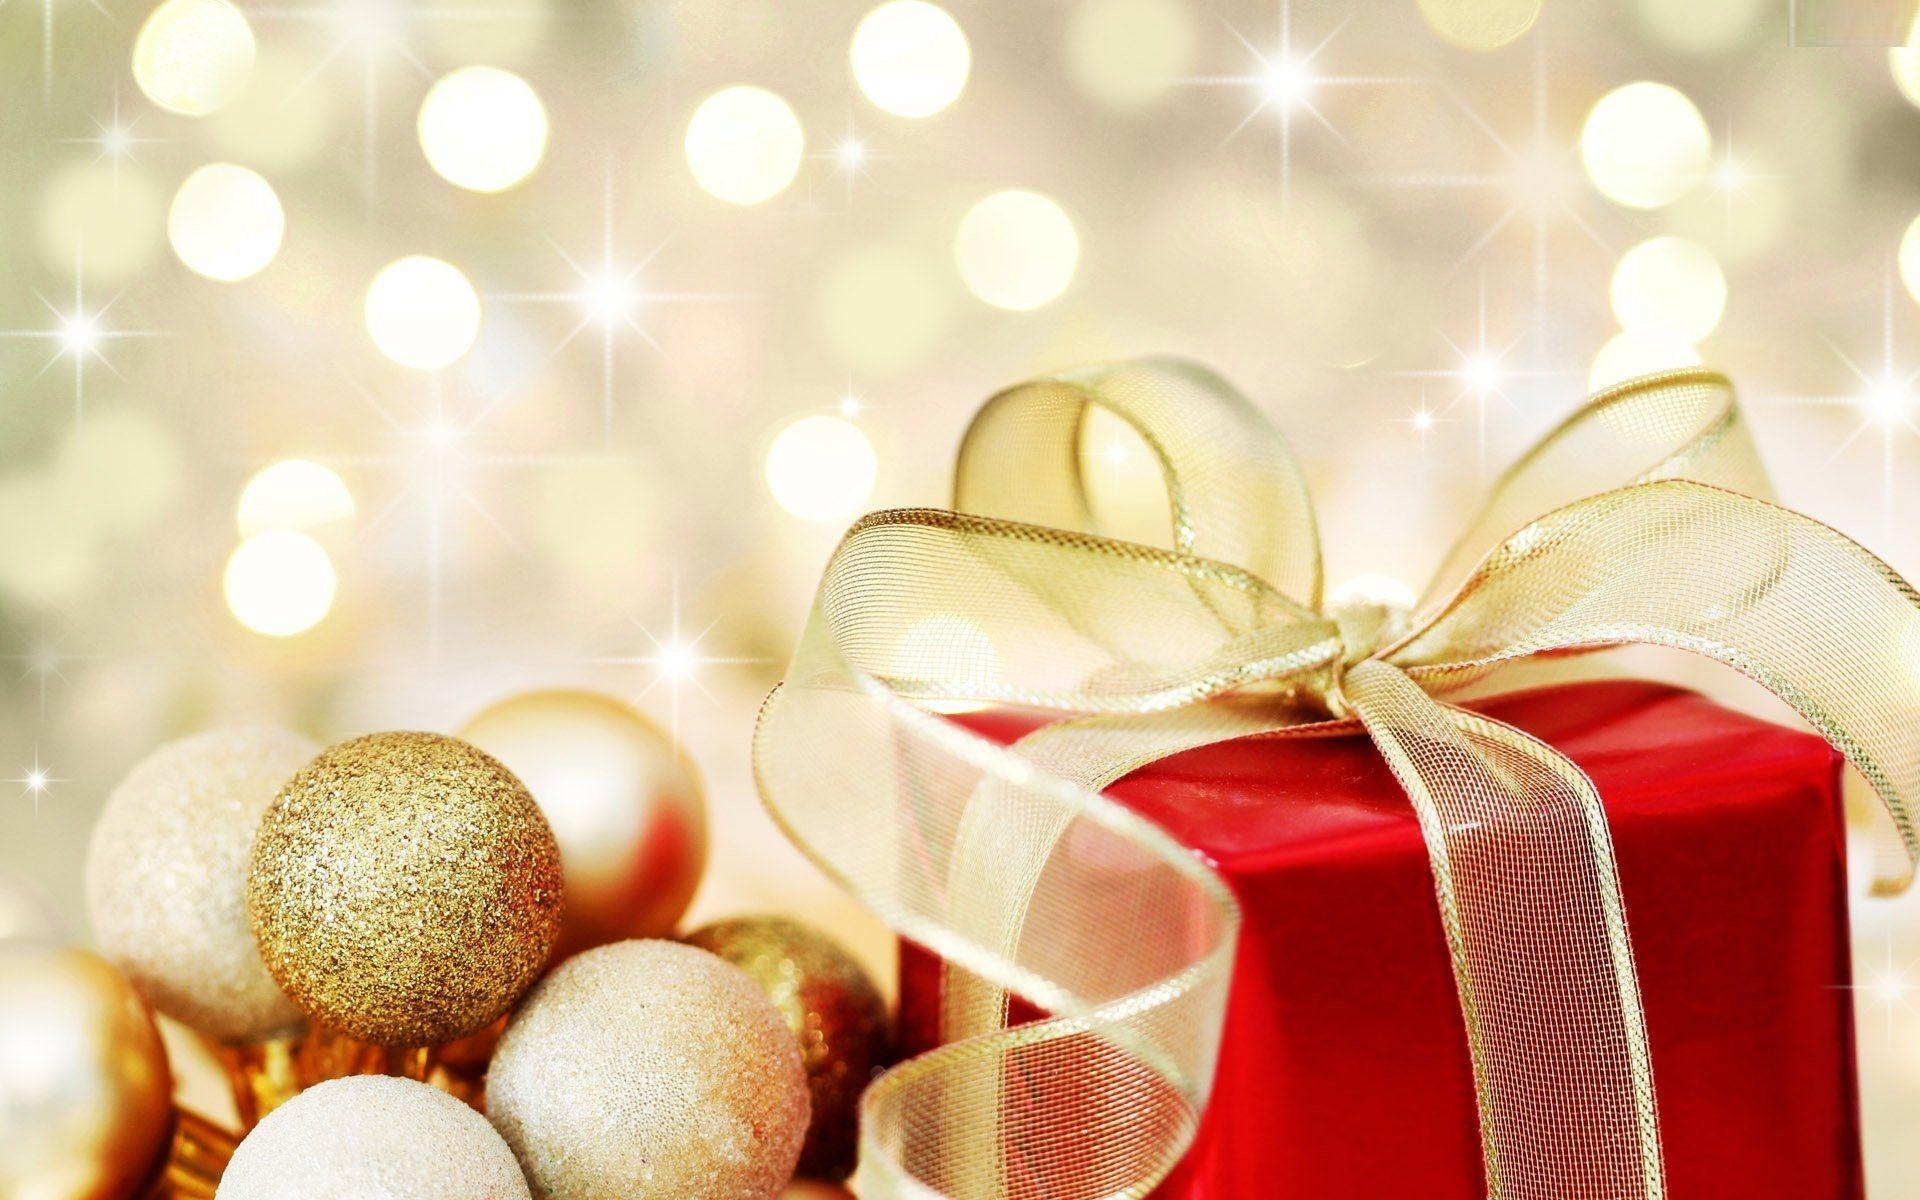 Gifts Merry Christmas HD Desktop Background Image, HQ